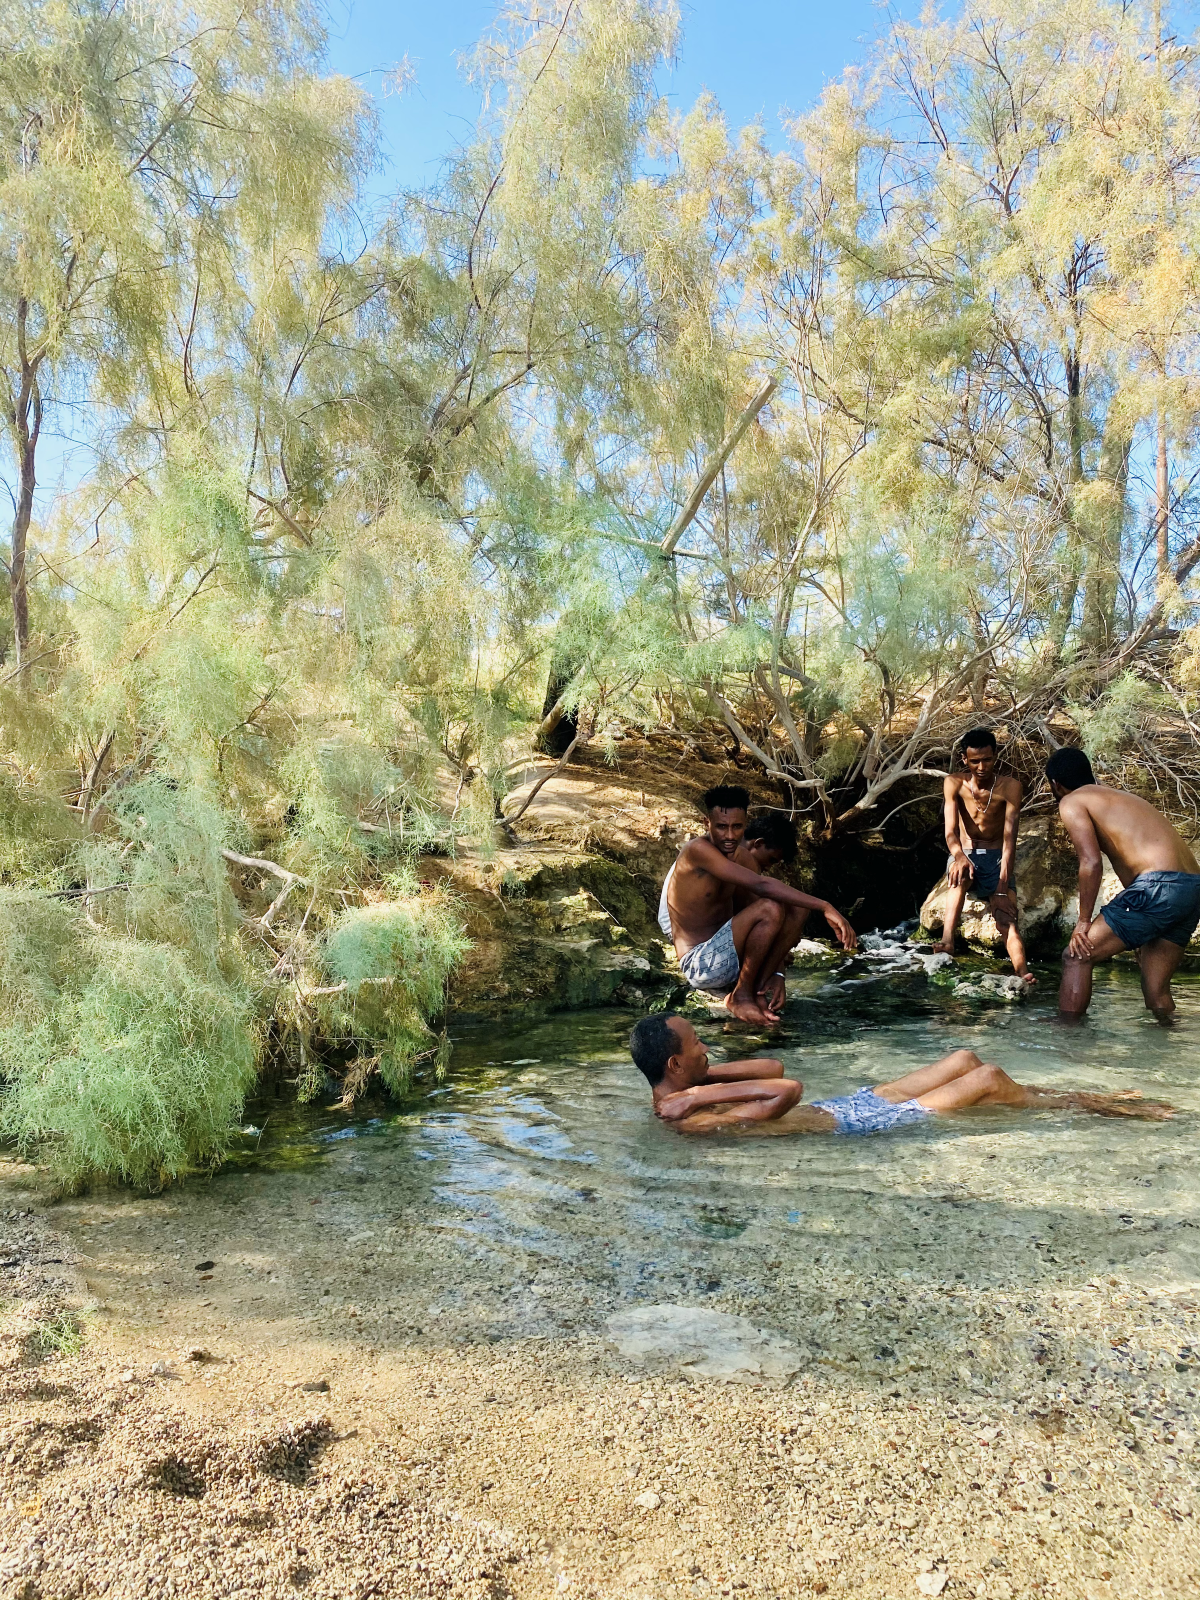 A group of four men bathe and sit in a clear, shallow pool underneath some sparse trees. The sky is light blue